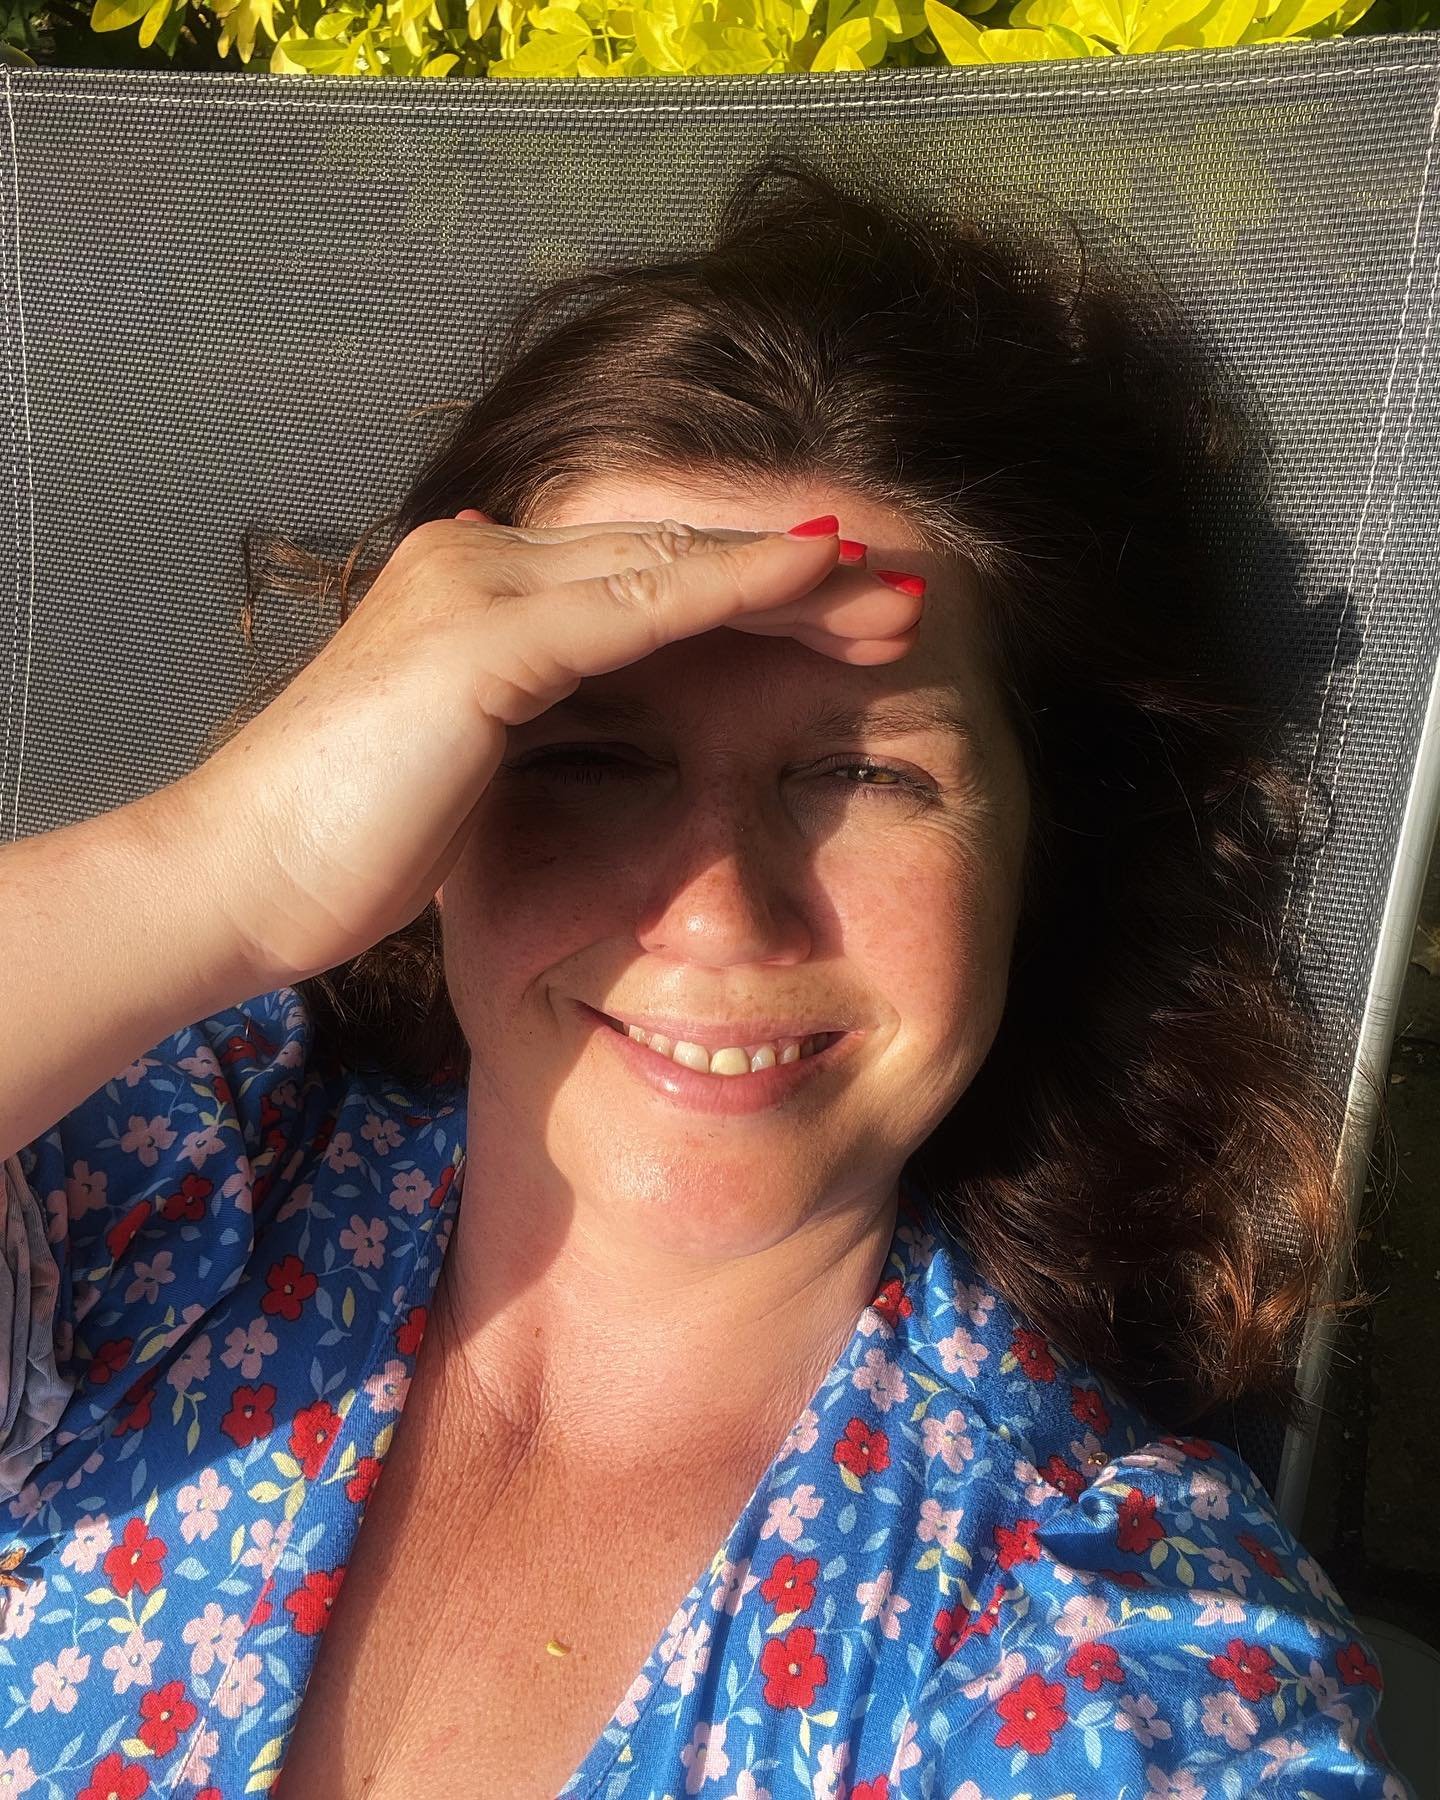 The face of a woman who&rsquo;s had 3 days &ldquo;off&rdquo; decluttering, tidying, sorting, washing, cleaning, BBQ-ing, swingball-ing, footballing, mothering, and is now enjoying lying in the sun but fighting the rising feeling of guilt for not &ldq